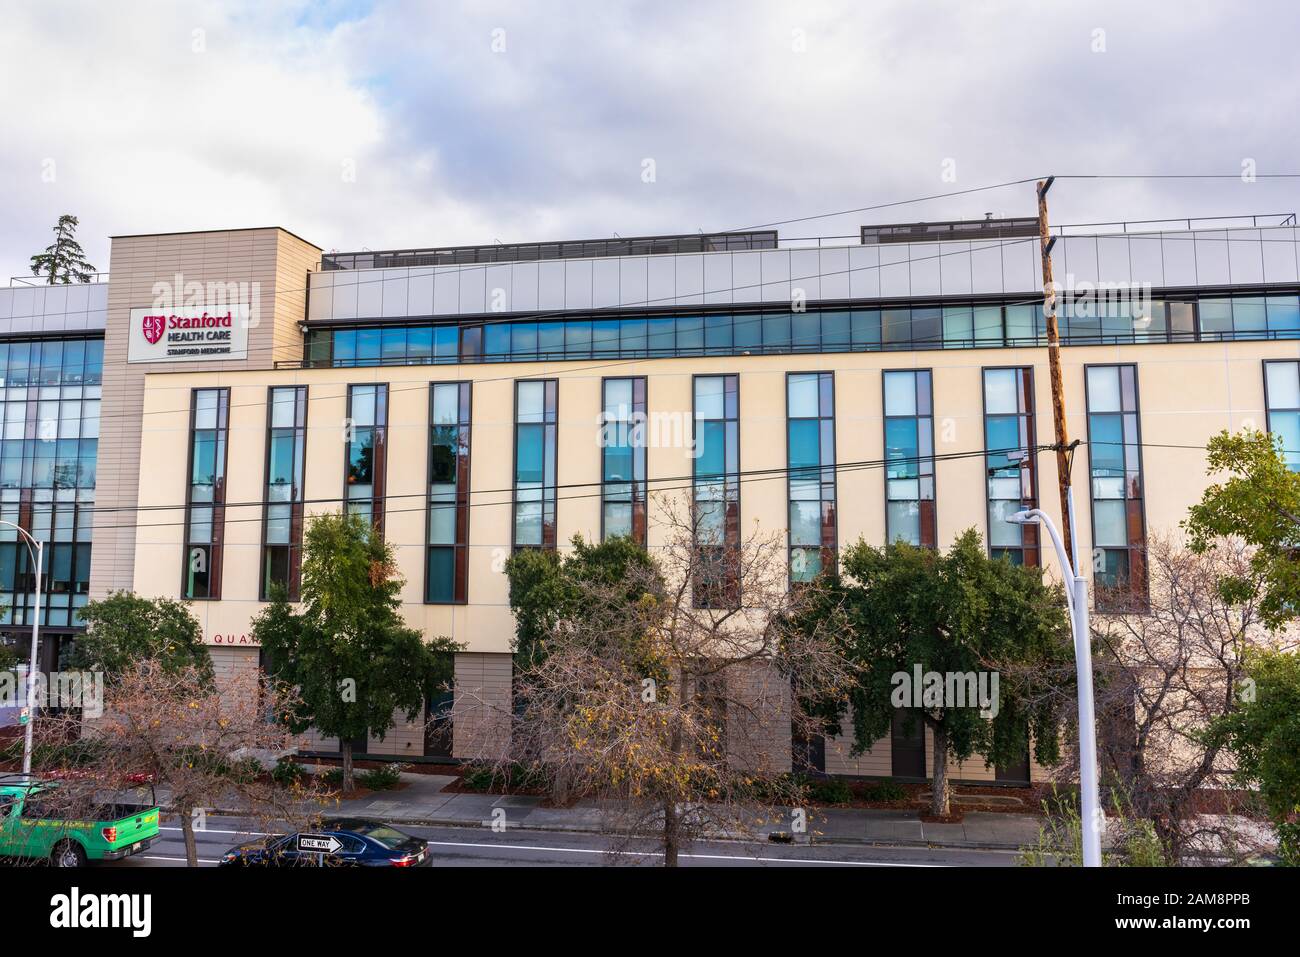 Jan 9, 2020 Palo Alto / CA / USA - Stanford Health Care facility; Stanford Health Care comprises of a network of medical facilities and doctors locate Stock Photo